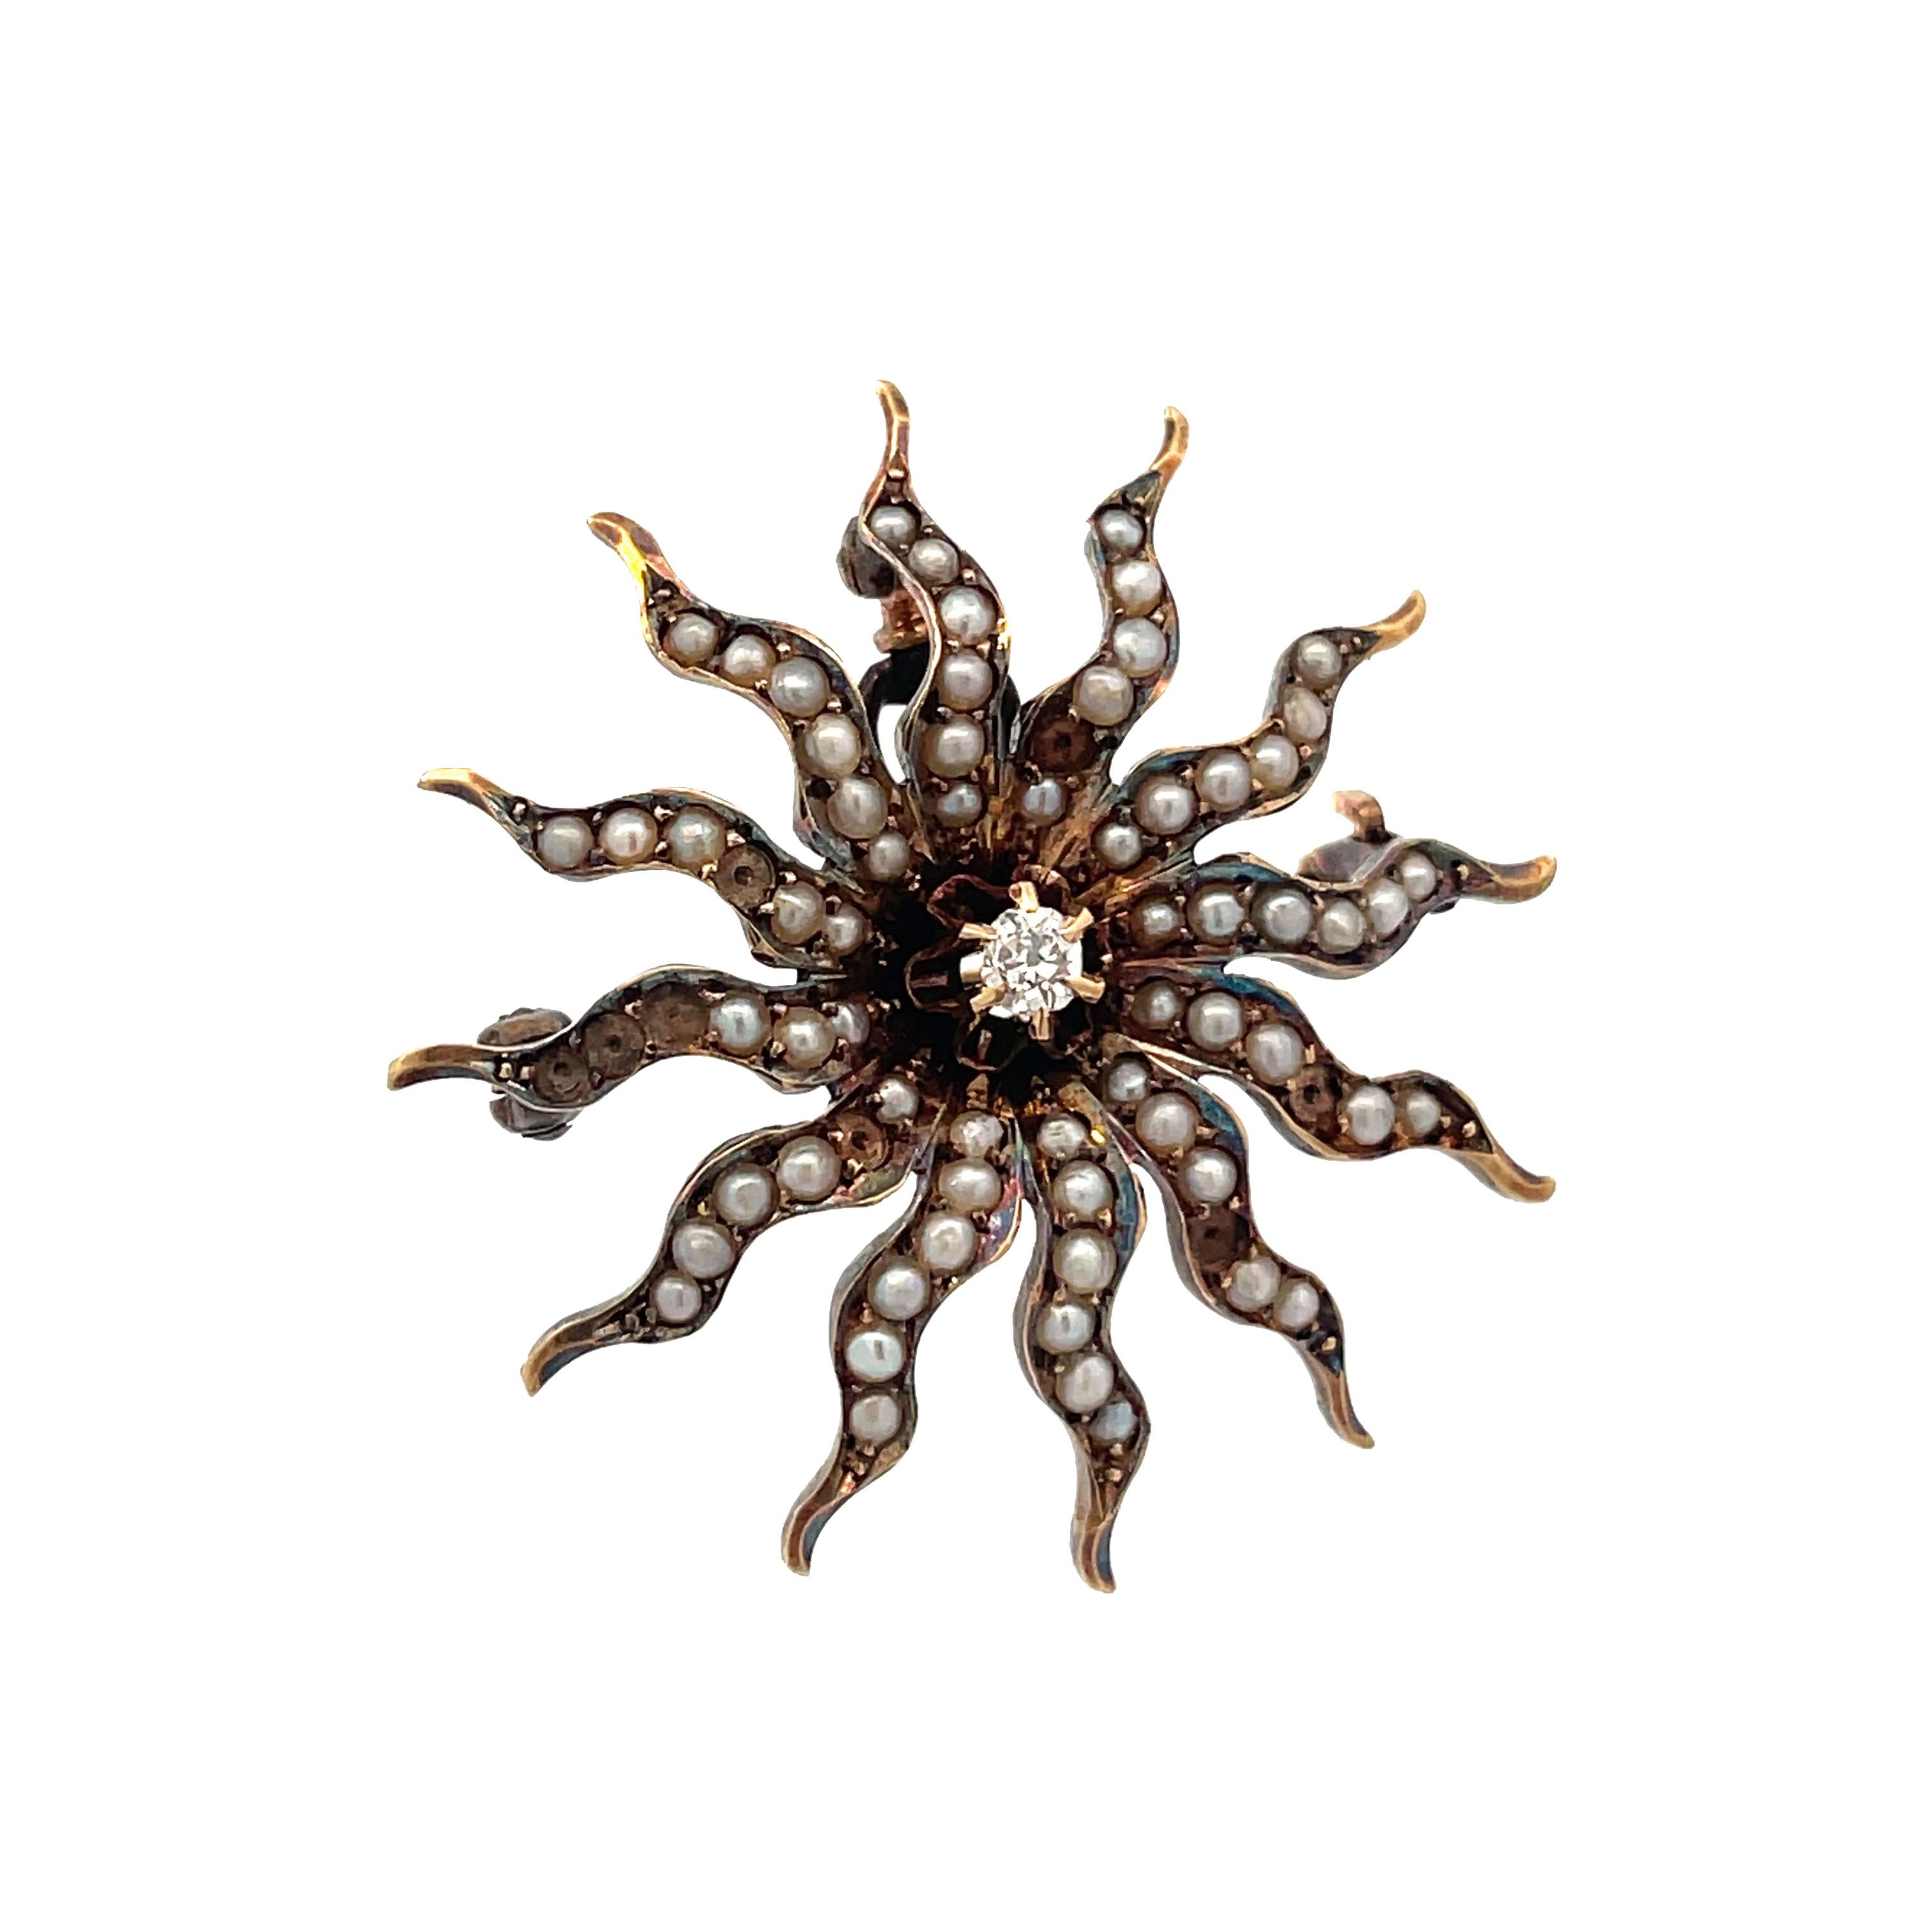 This is a beautiful Edwardian pin/pendant crafted in 14K yellow gold that showcases a stunning collection of seed pearls and an Old Mine Cut diamond at the center. This lovely Edwardian pin has a whimsical sunburst design. The sun's rays are dotted